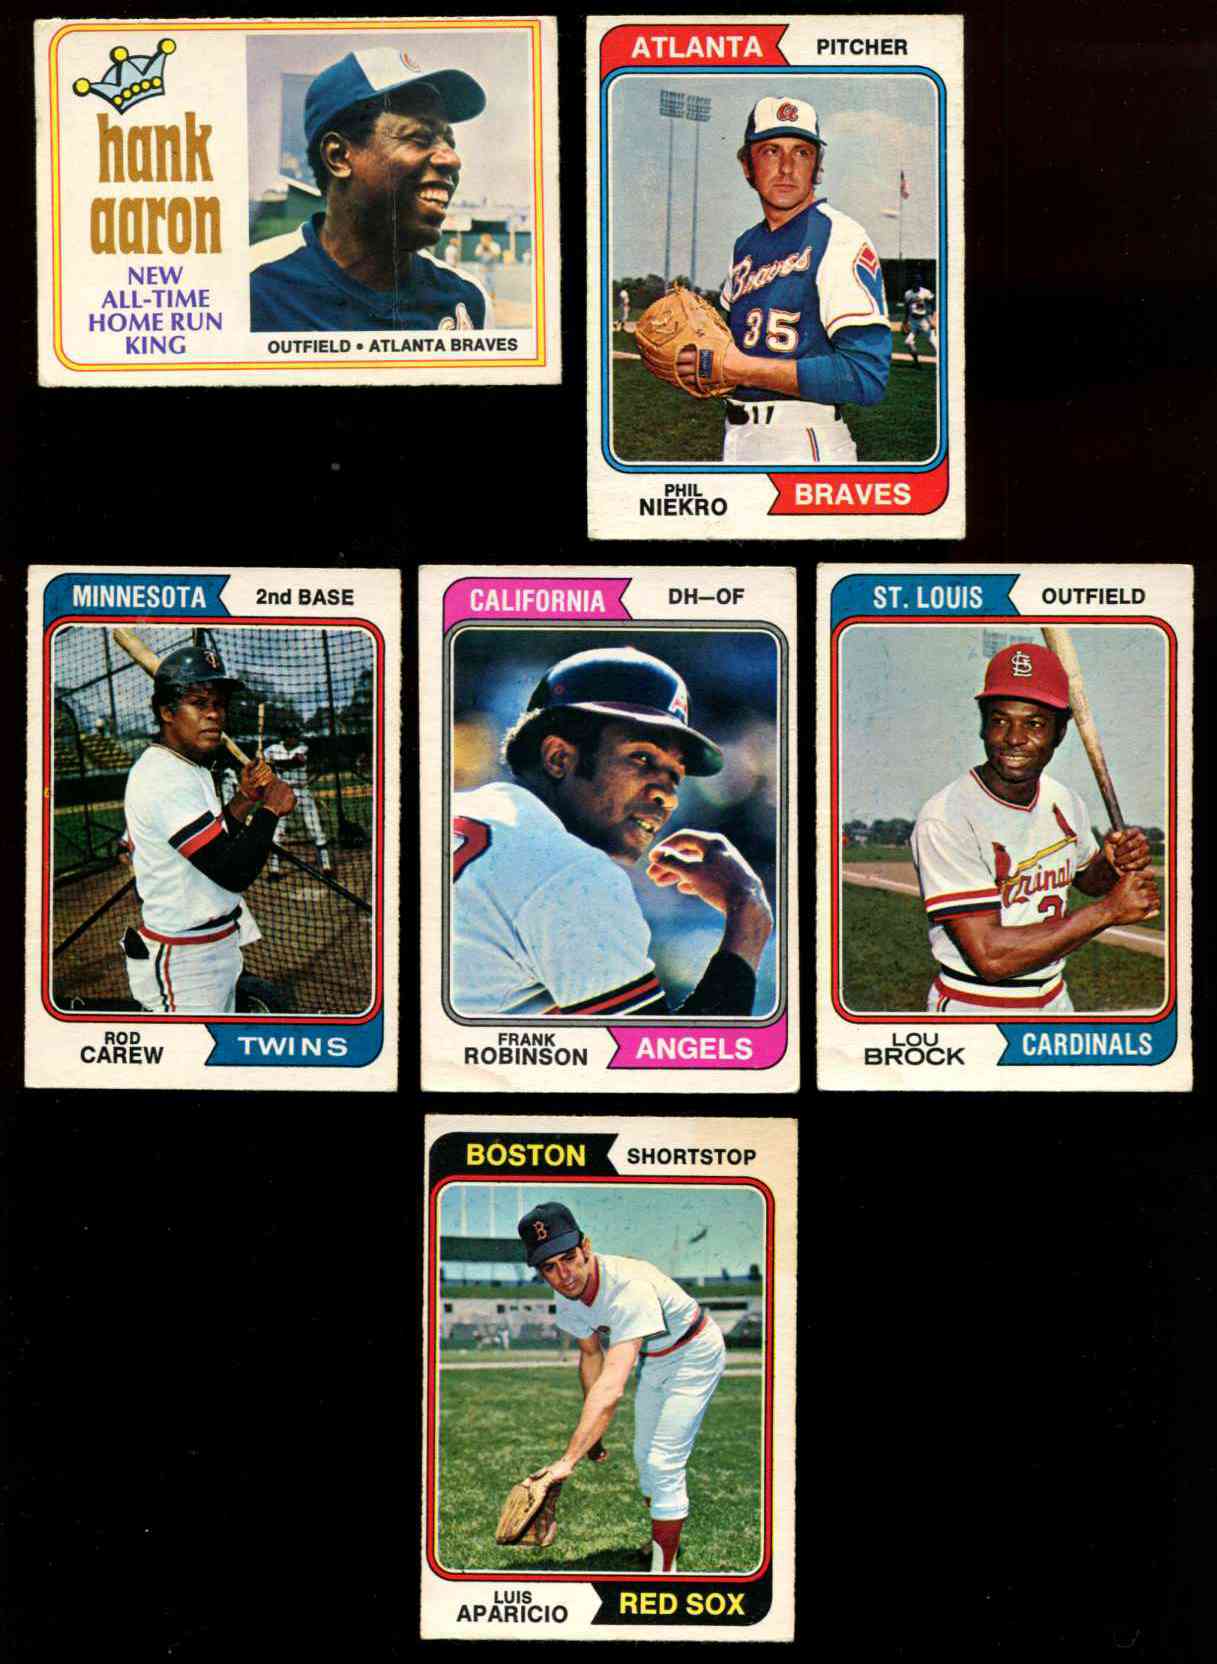 1974 O-Pee-Chee/OPC #  1 Hank Aaron 'Complete ML Record' [#x] (Braves) Baseball cards value